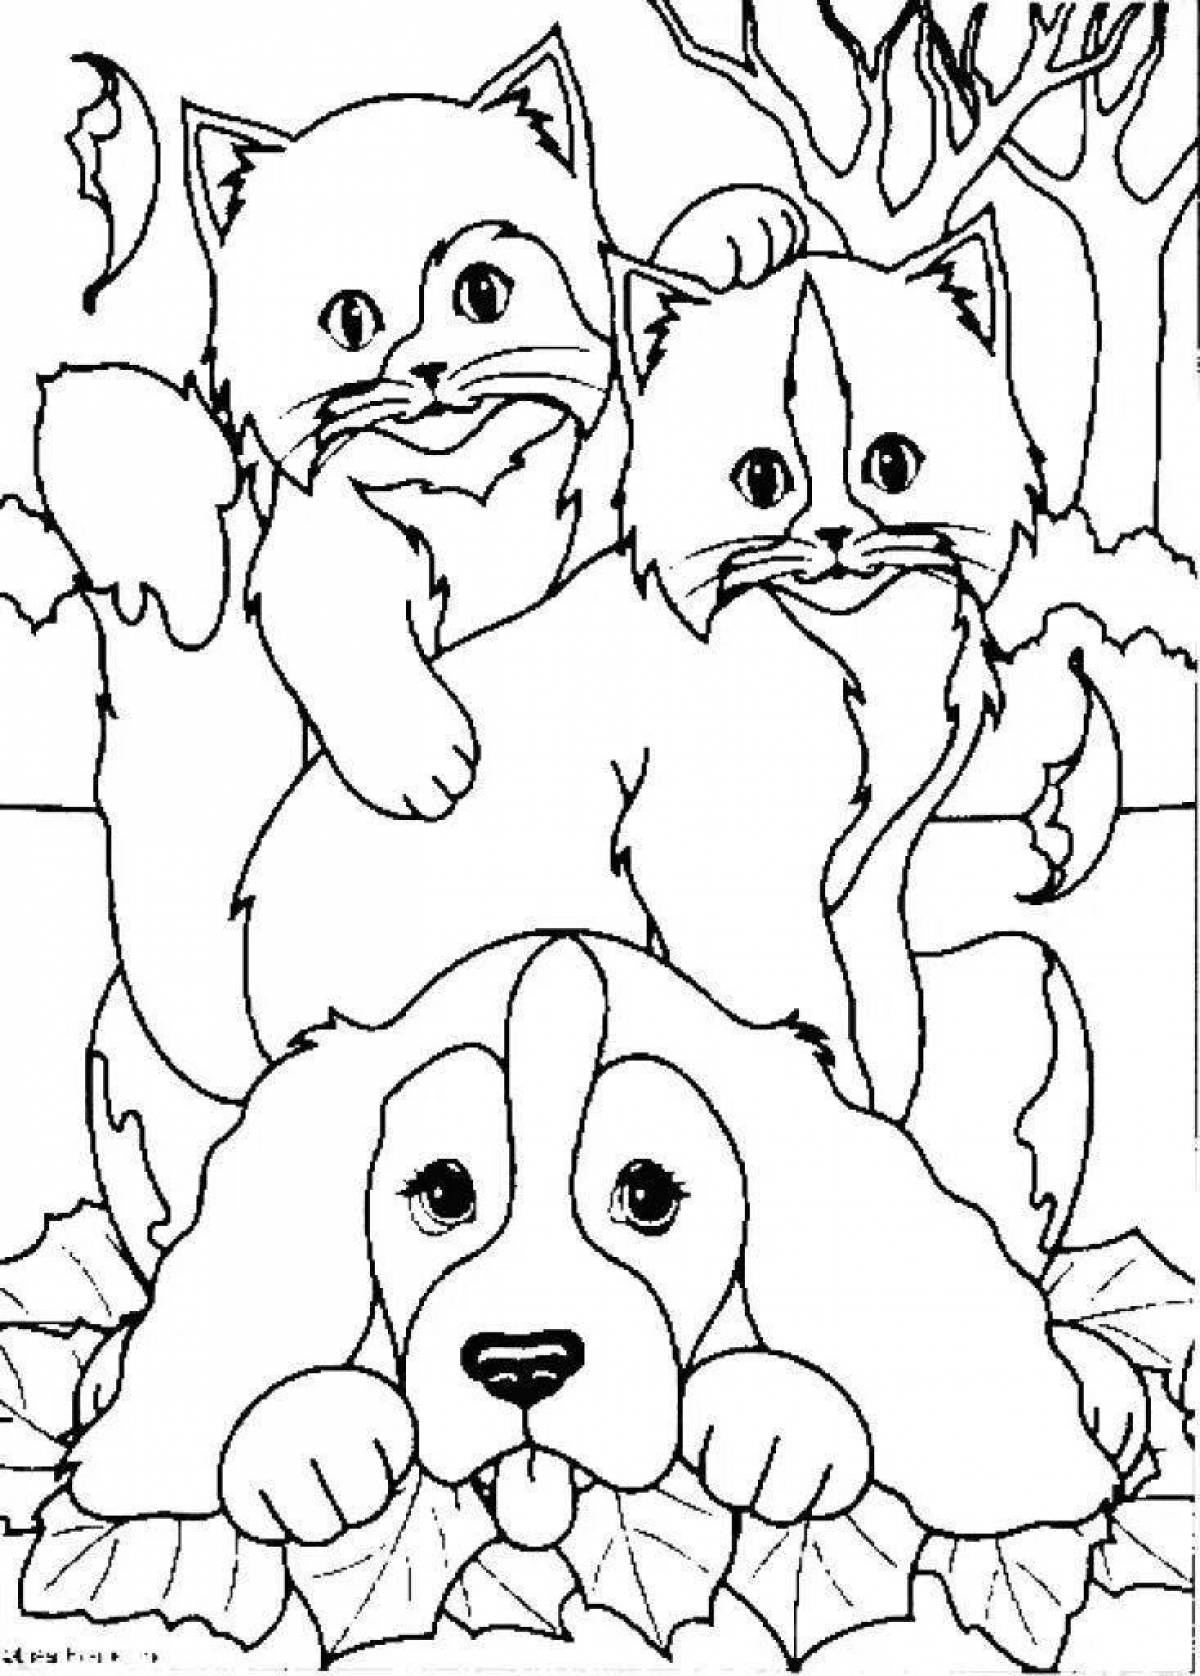 Fun coloring pages of dogs and cats for kids